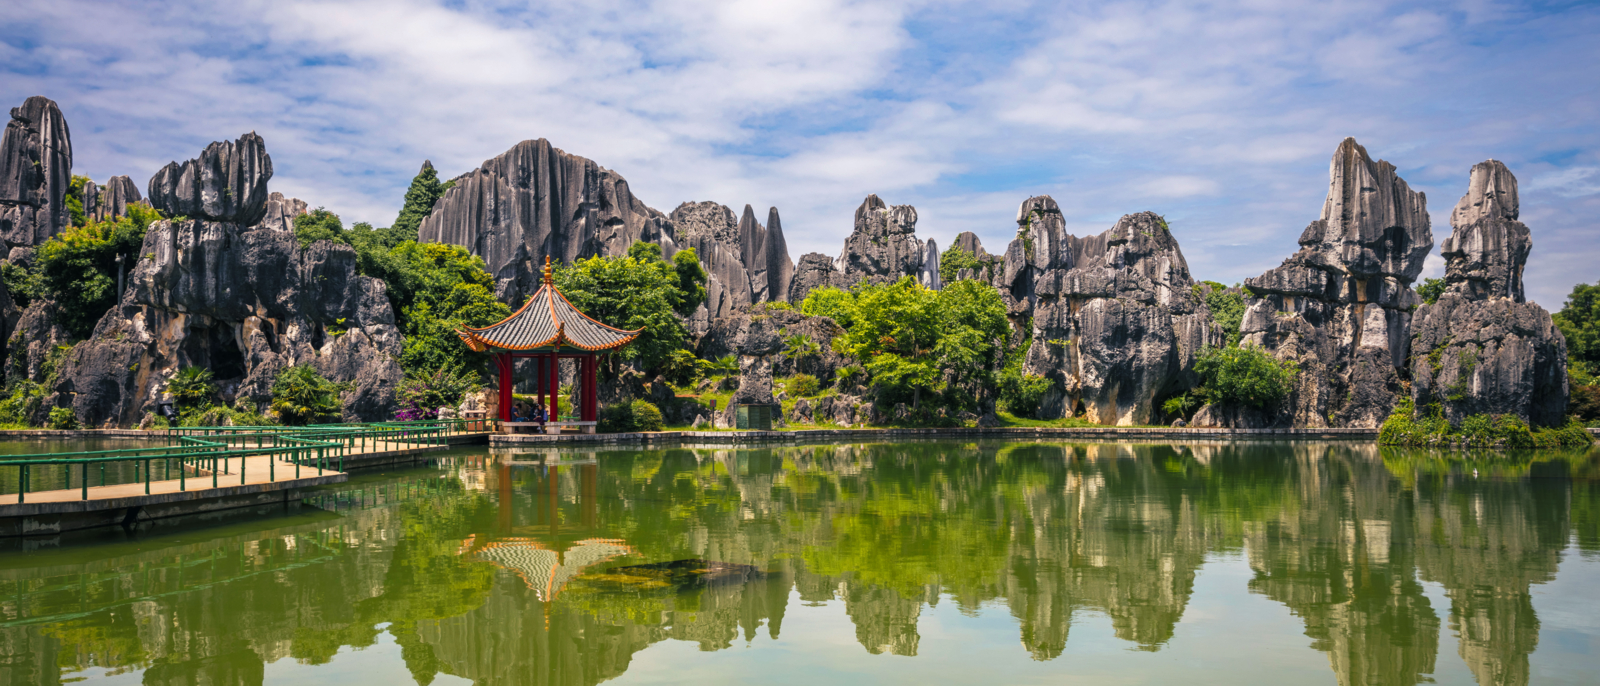 China - East Asia, Stone Forest - Kunming, Yunnan Province, Clear Sky, Copy Space. The Stone Forest or Shilin is a notable set of limestone formations